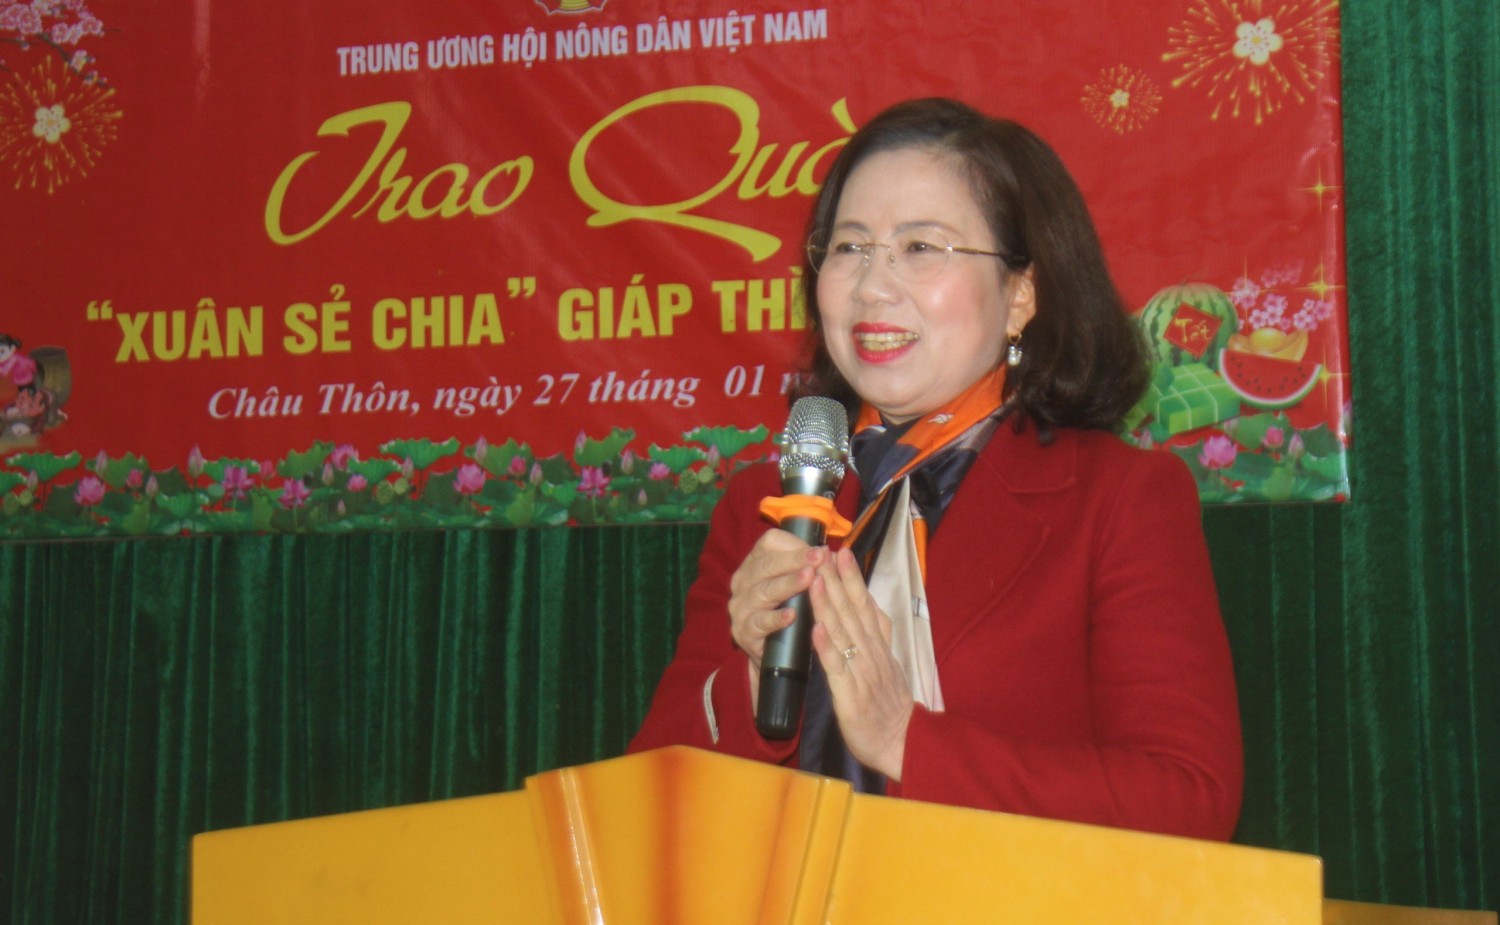 anh chi thom1 1